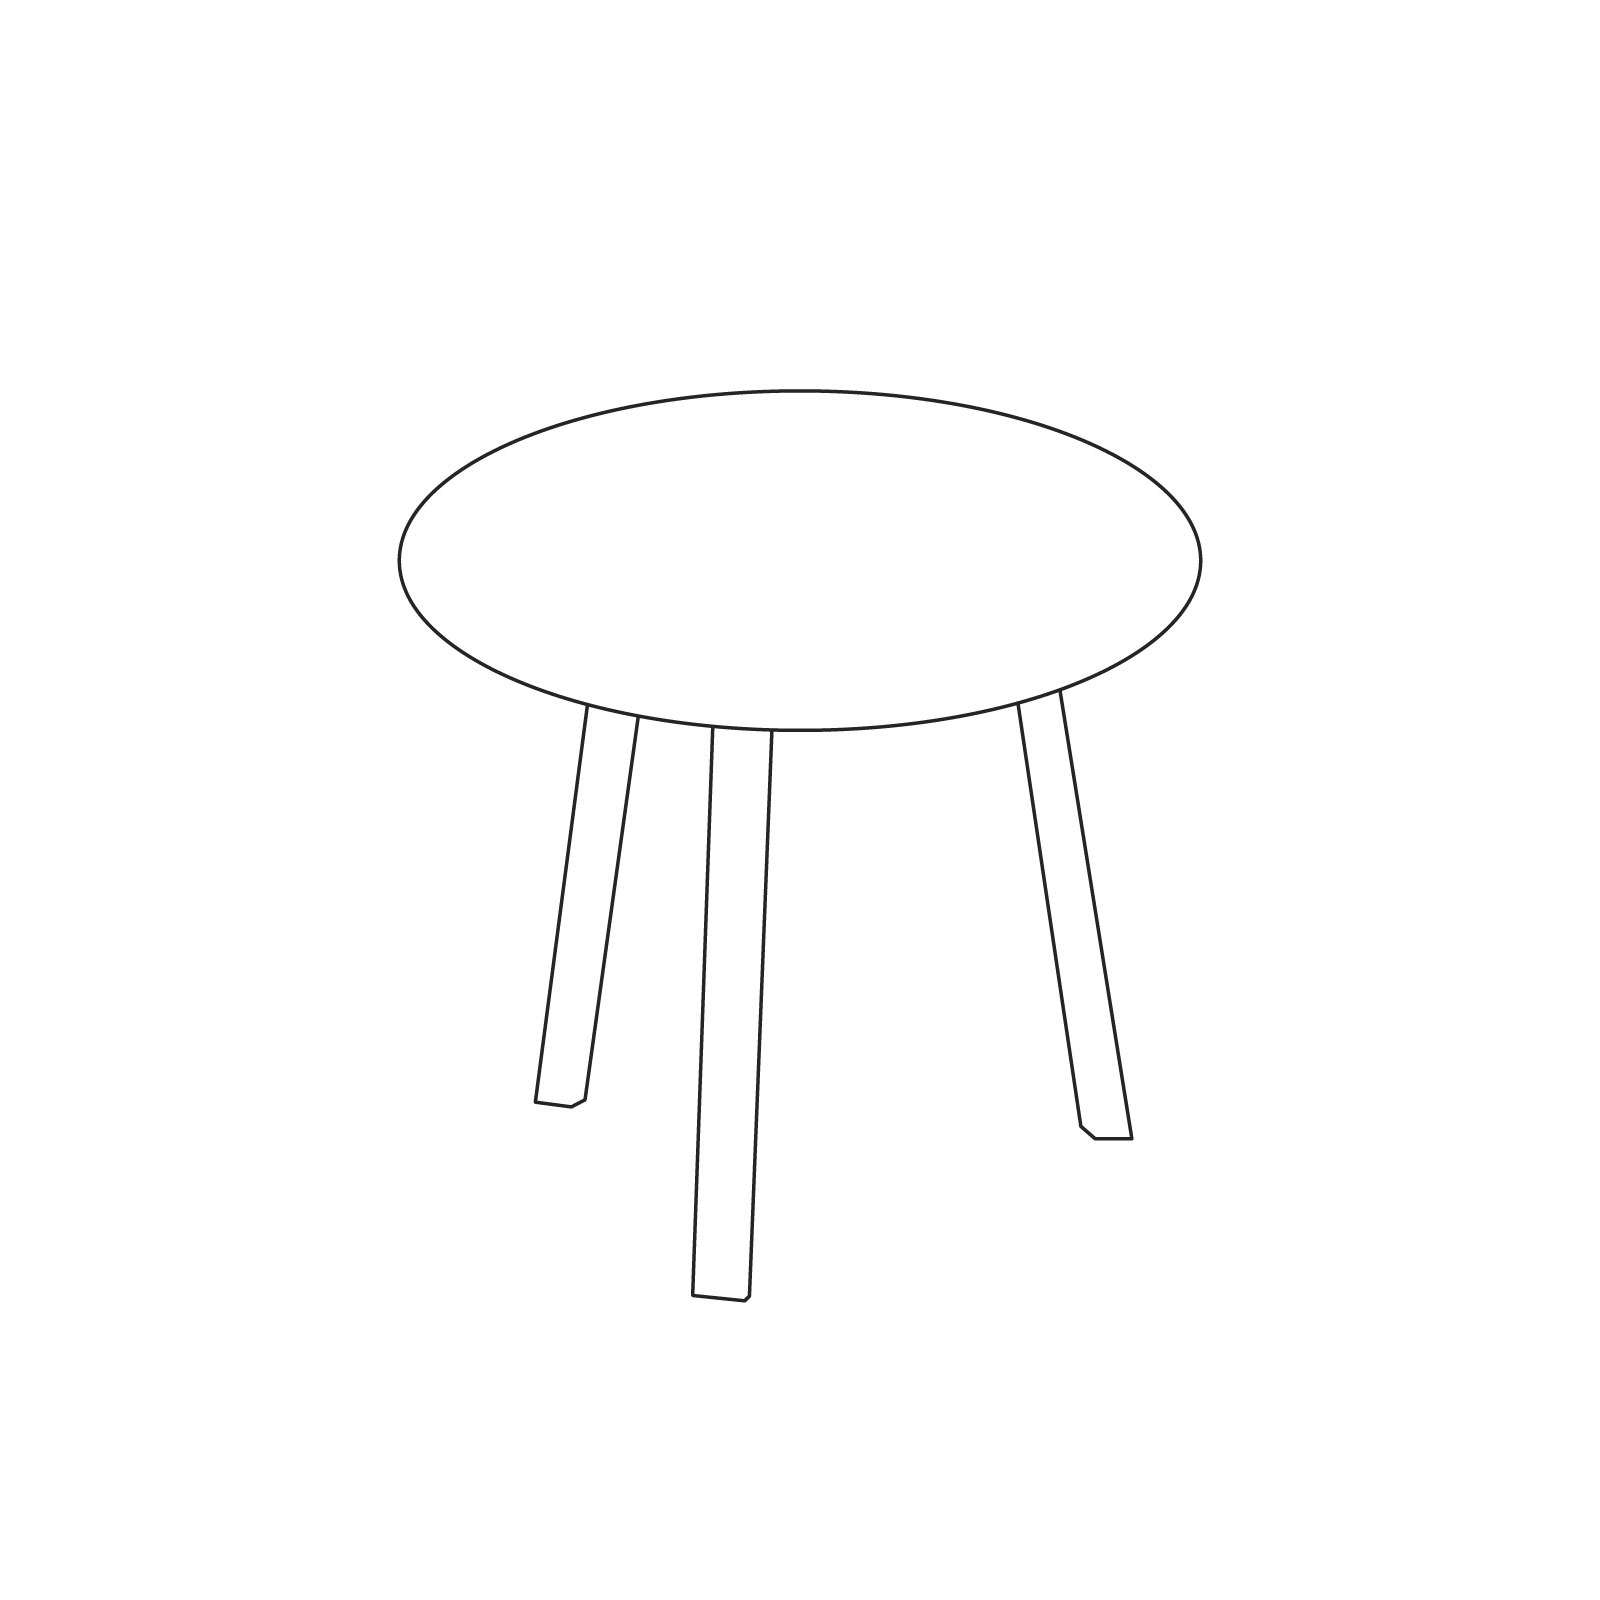 A line drawing of Bella Coffee Table–High.